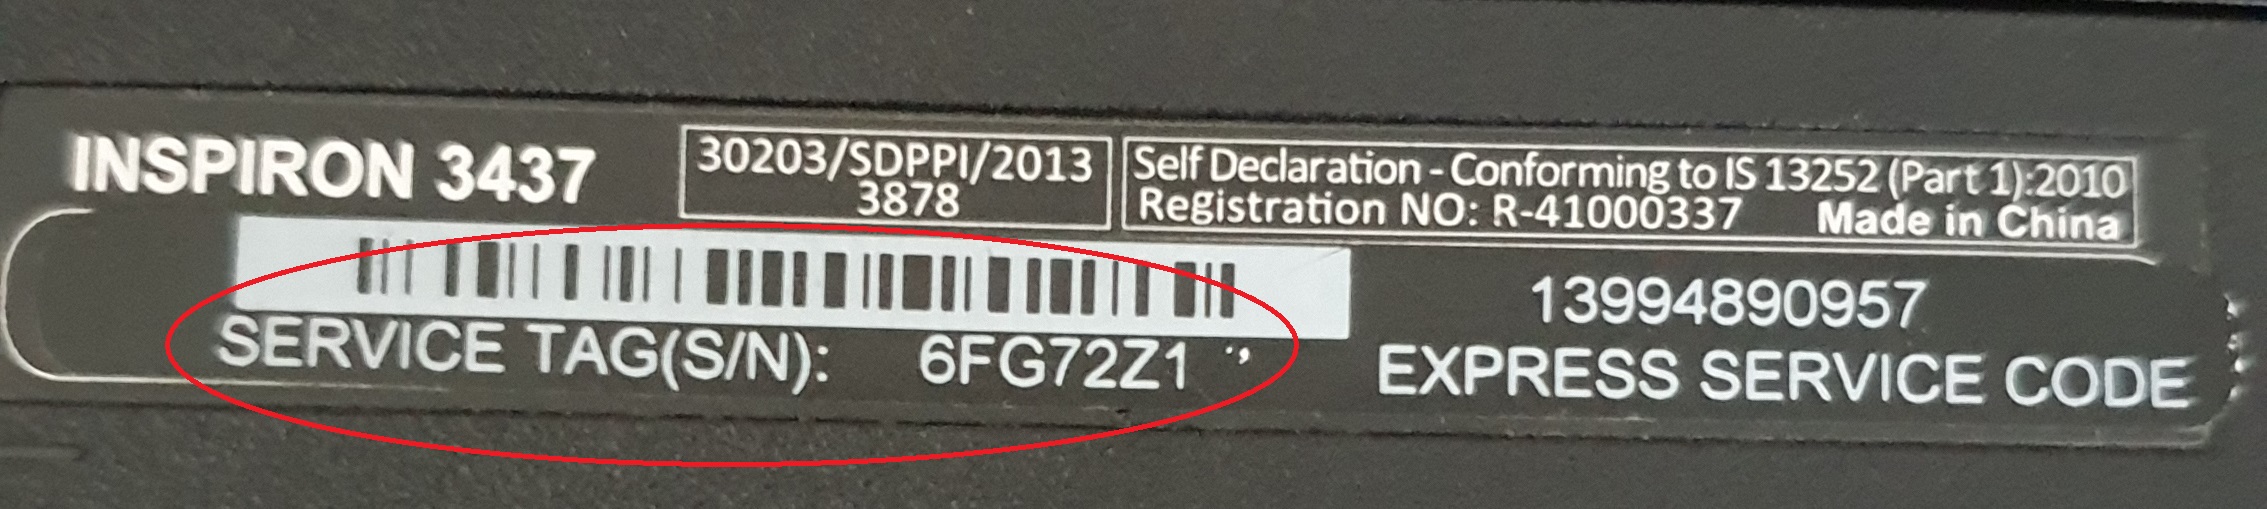 Dell Serial Number Sample